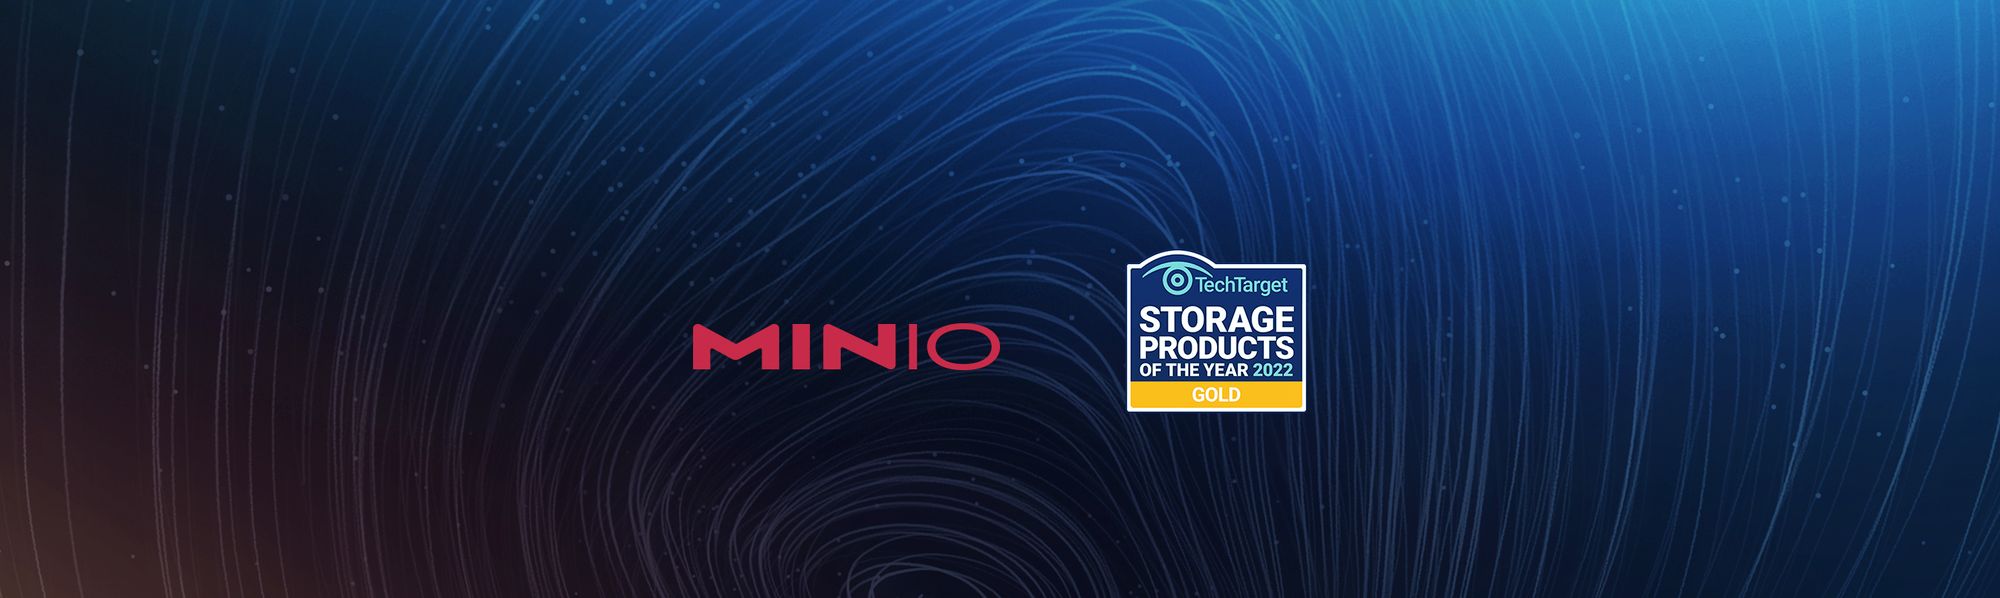 MinIO Wins TechTarget’s Storage Product of the Year for Second Time!